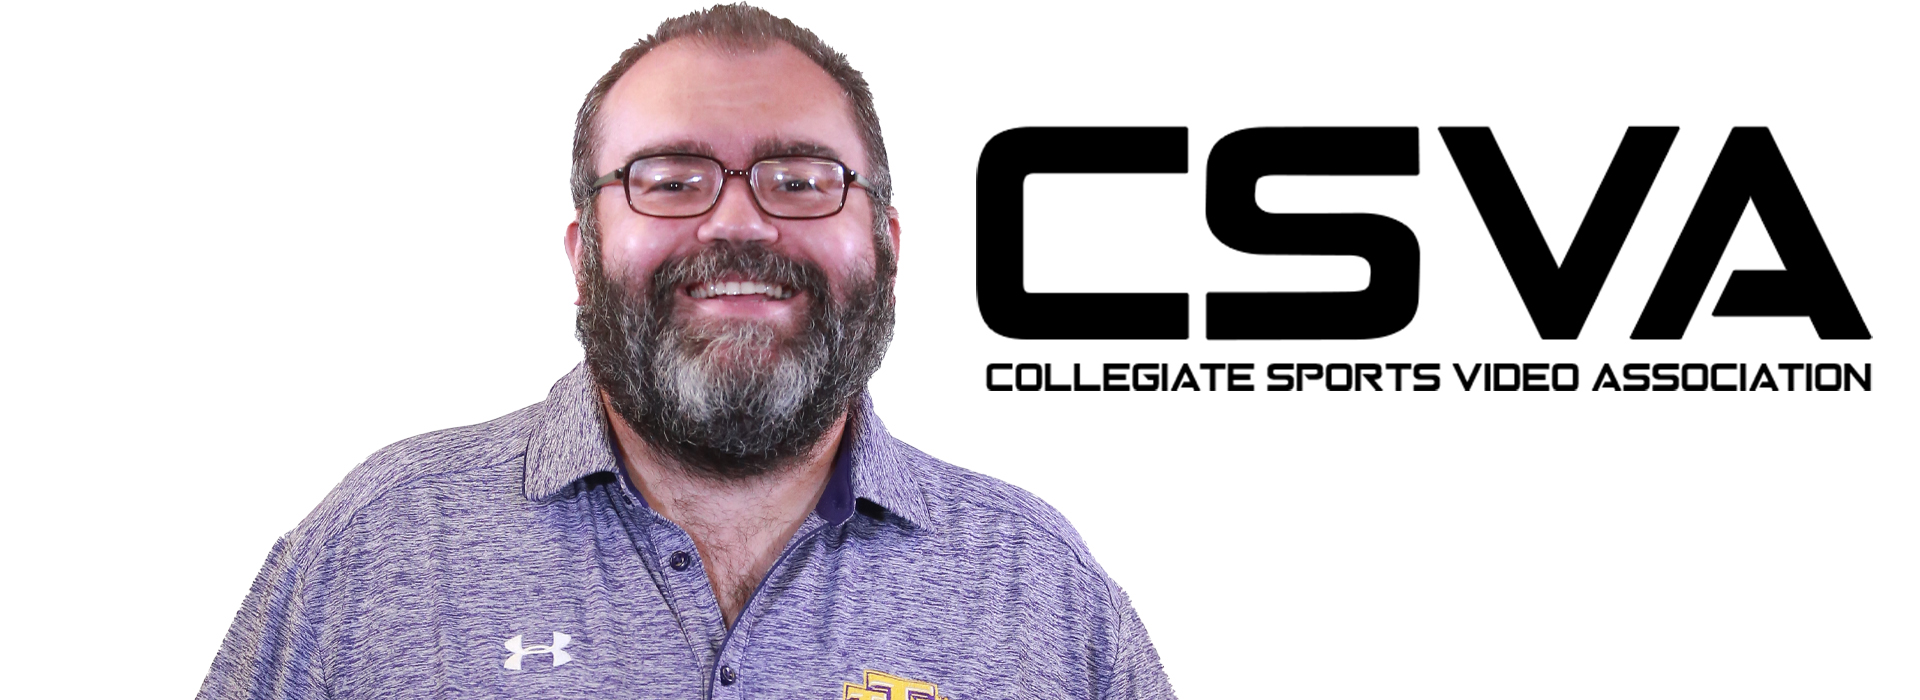 Raymond named finalist for CSVA's FCS Video Coordinator of the Year